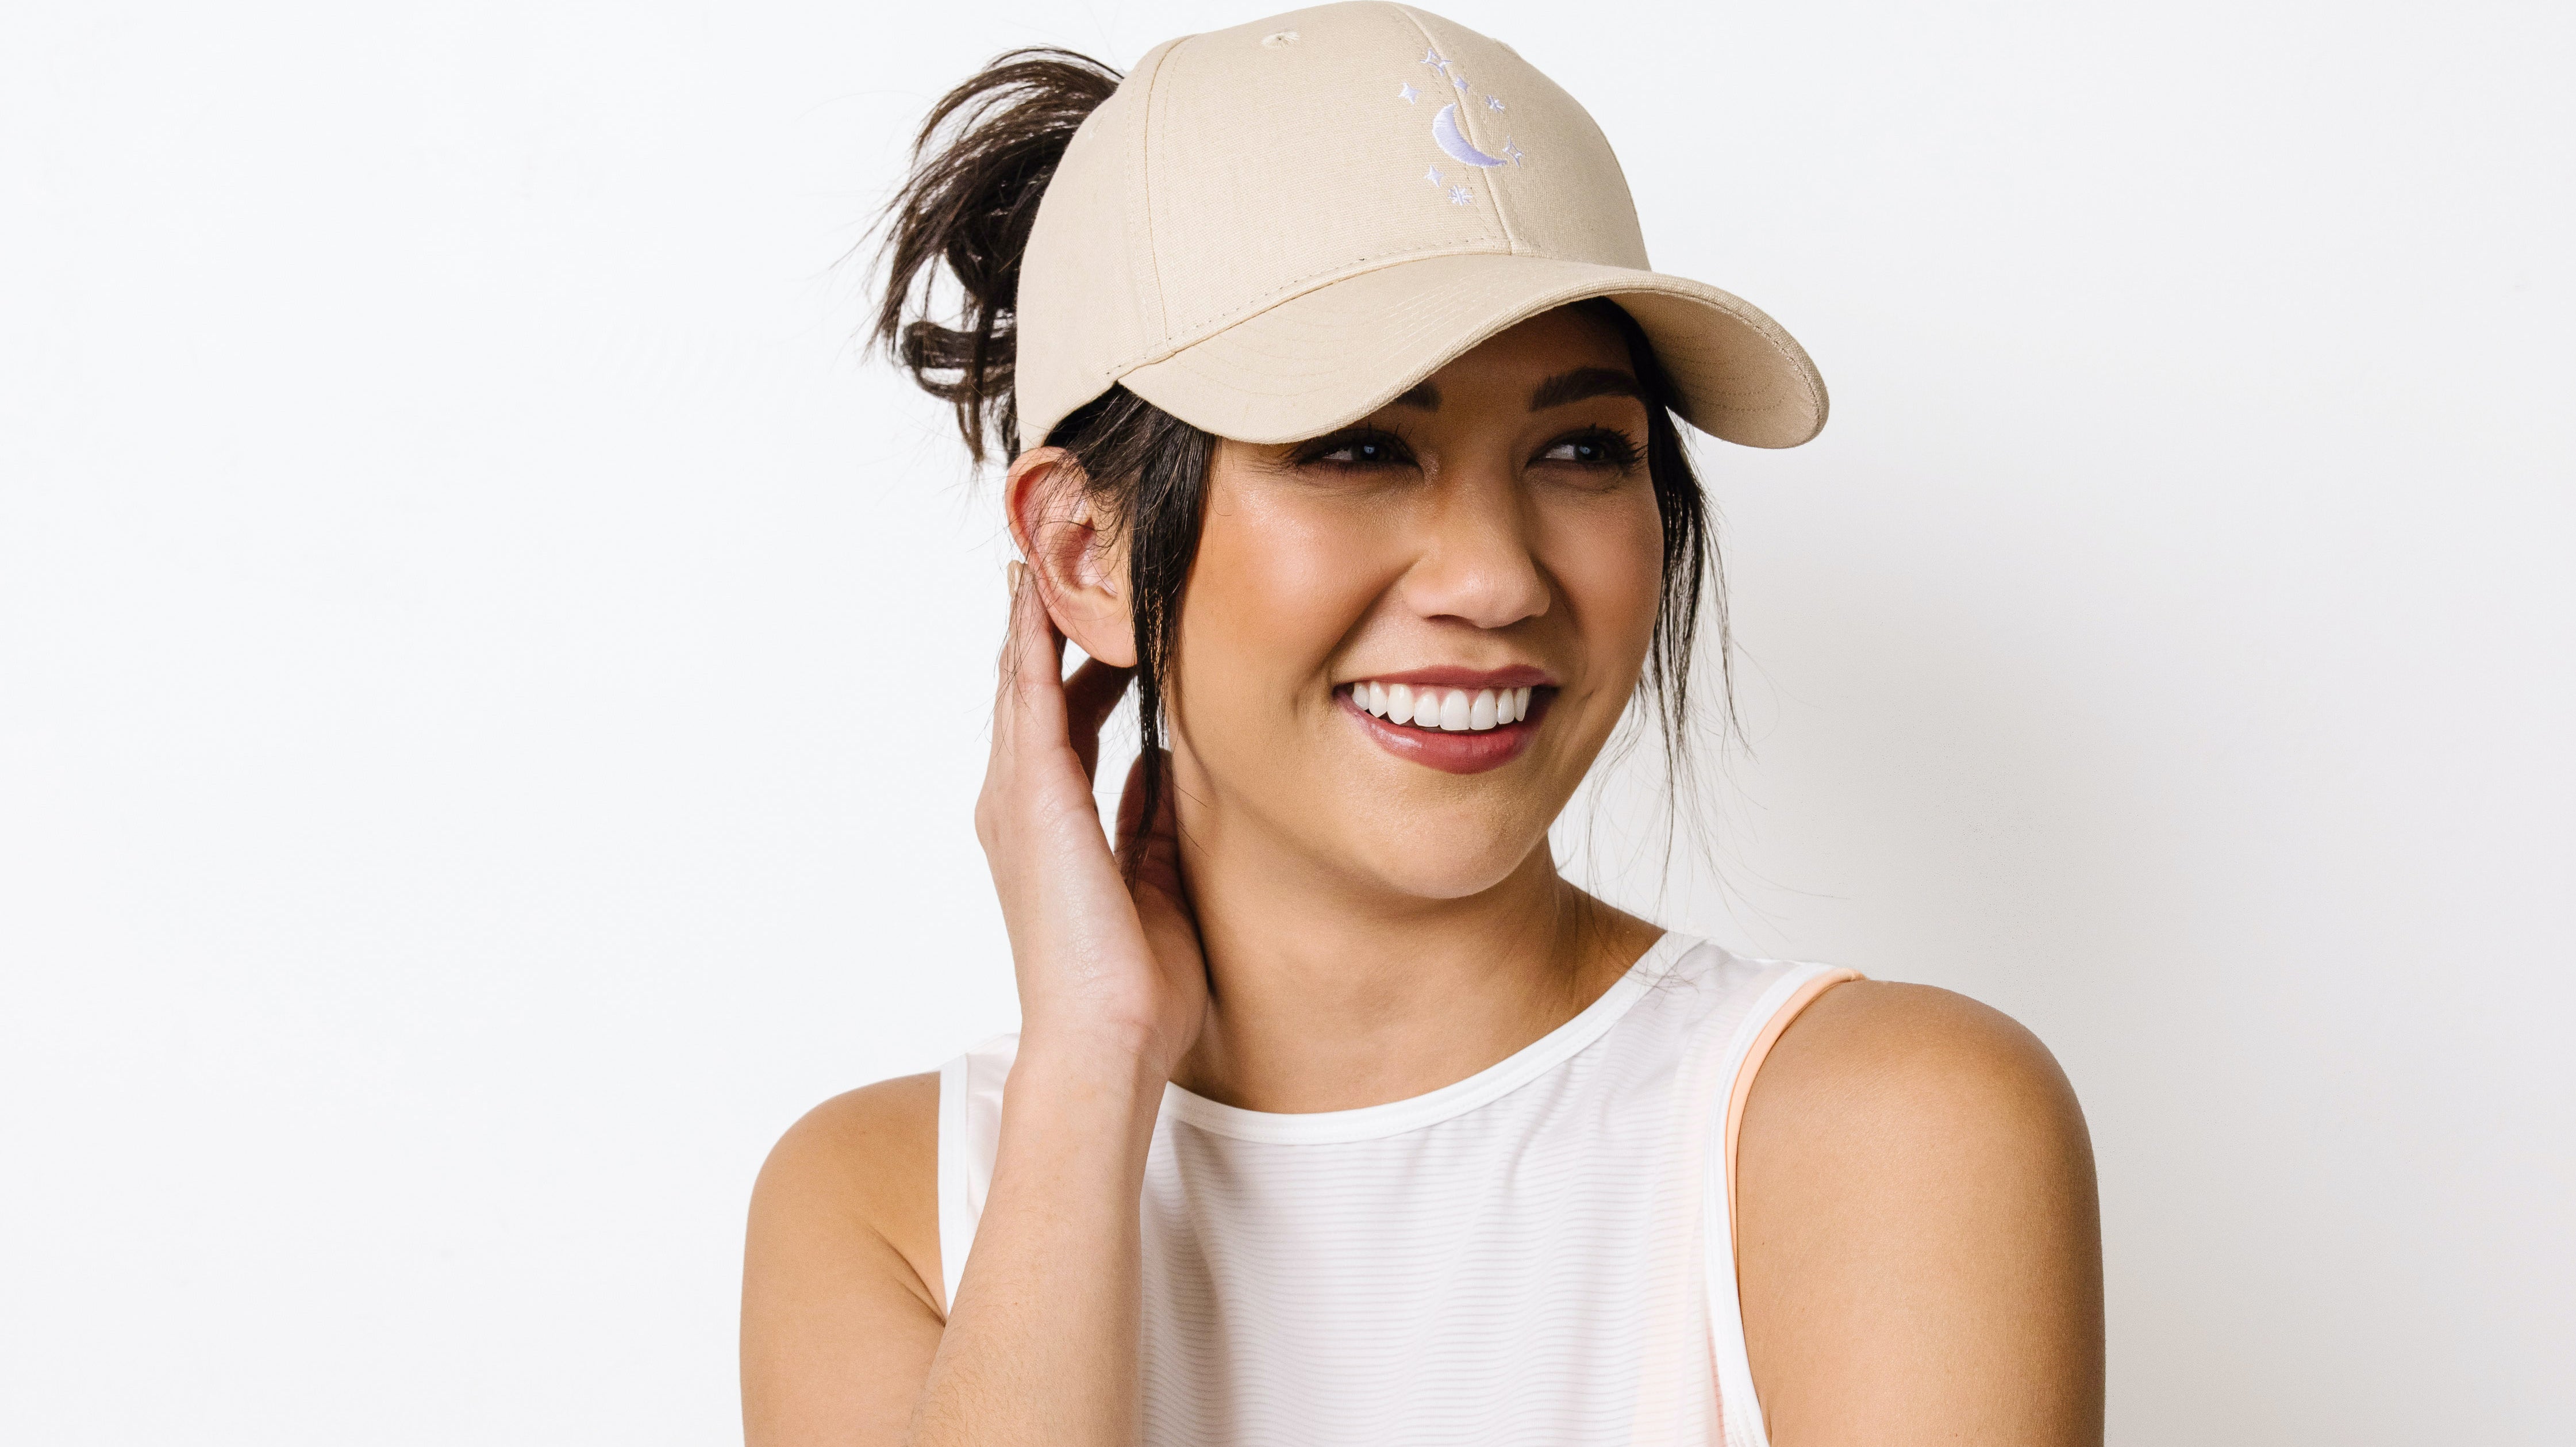 These New High Ponytail Caps We Designed Will Change Your Life